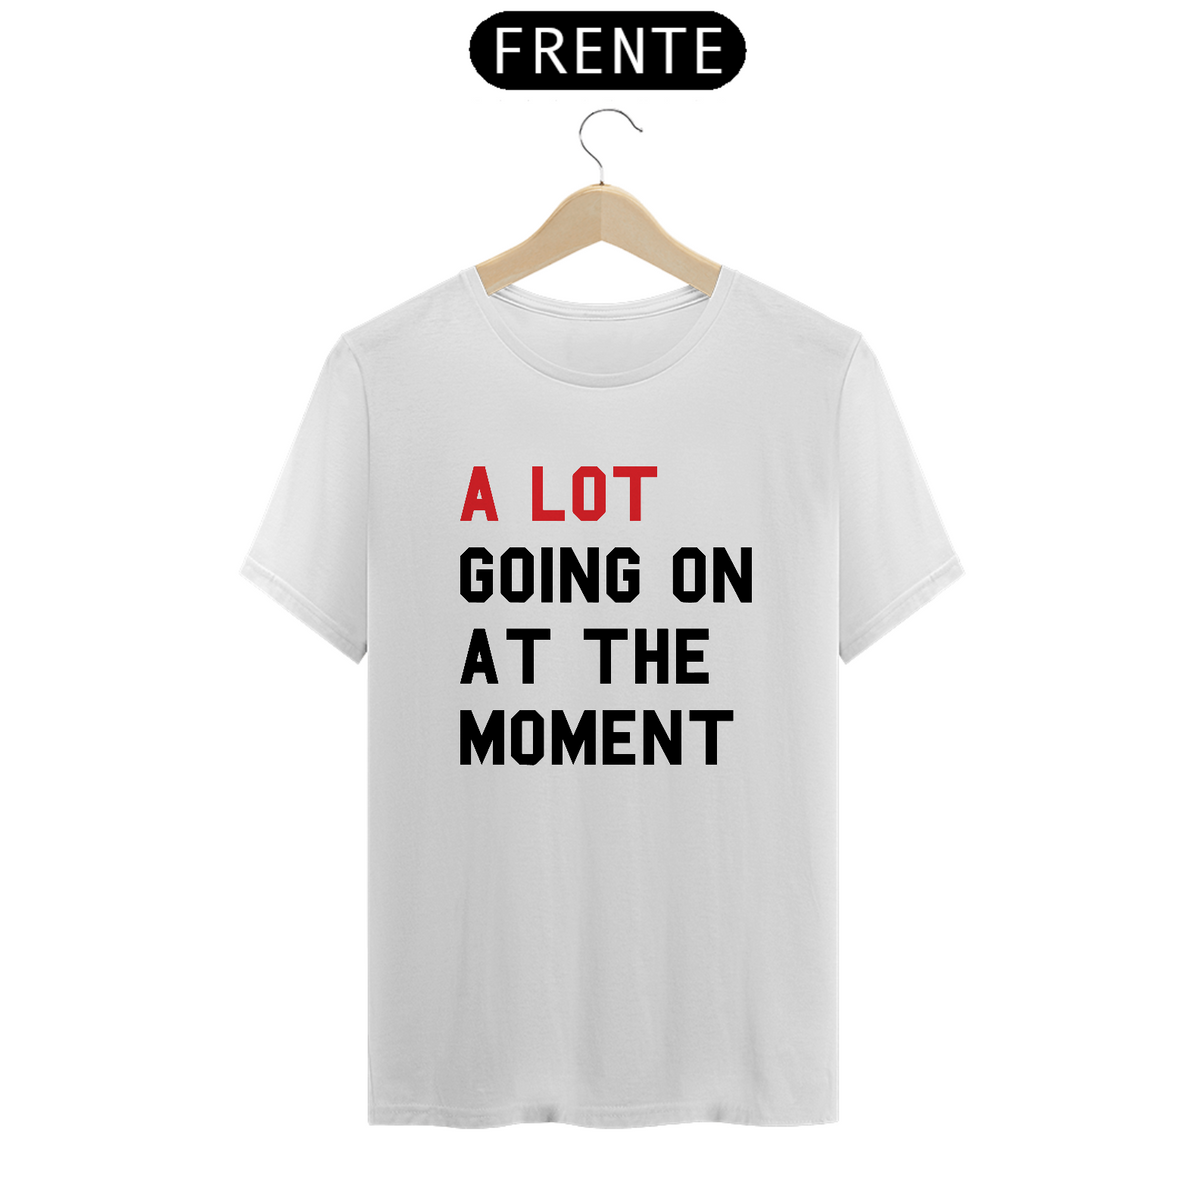 Nome do produto: Camiseta Unissex - A Lot Going On At The Moment  22 Taylor Swift